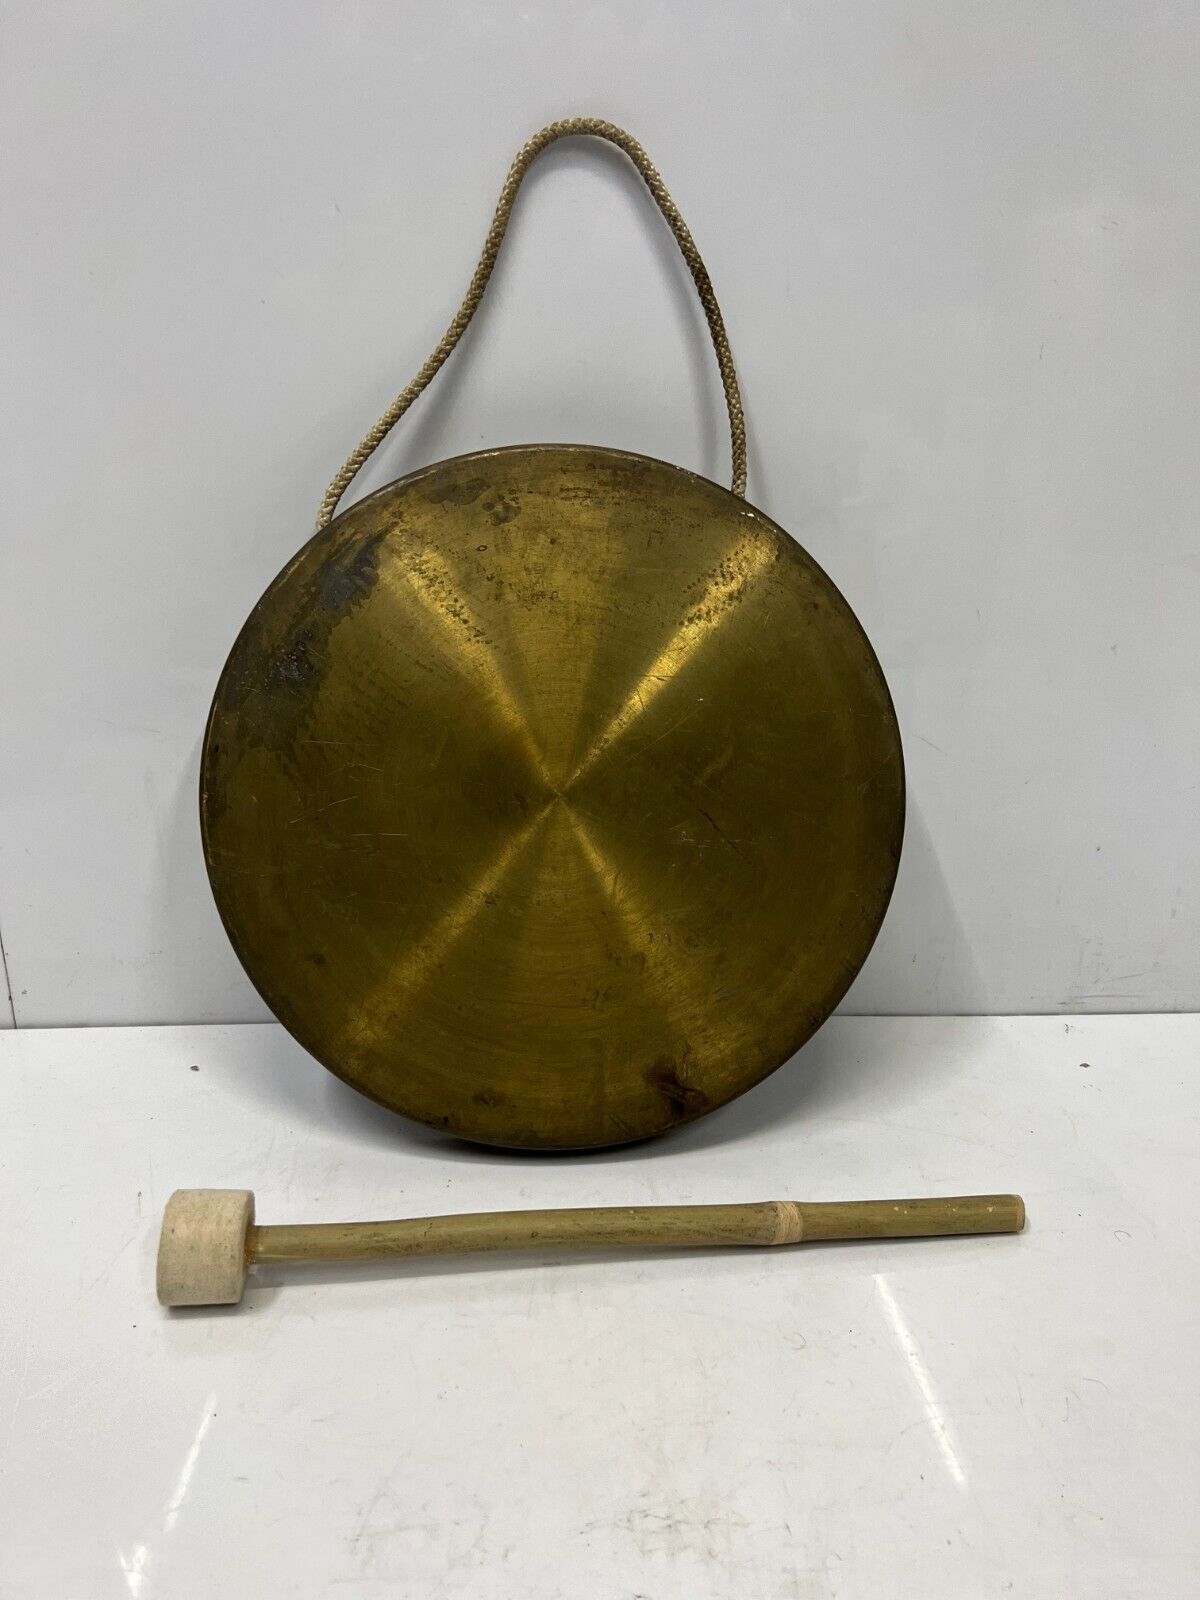 traditional Old Vintage Round PlateBrass Metal  Original Gong Bell With Mallet